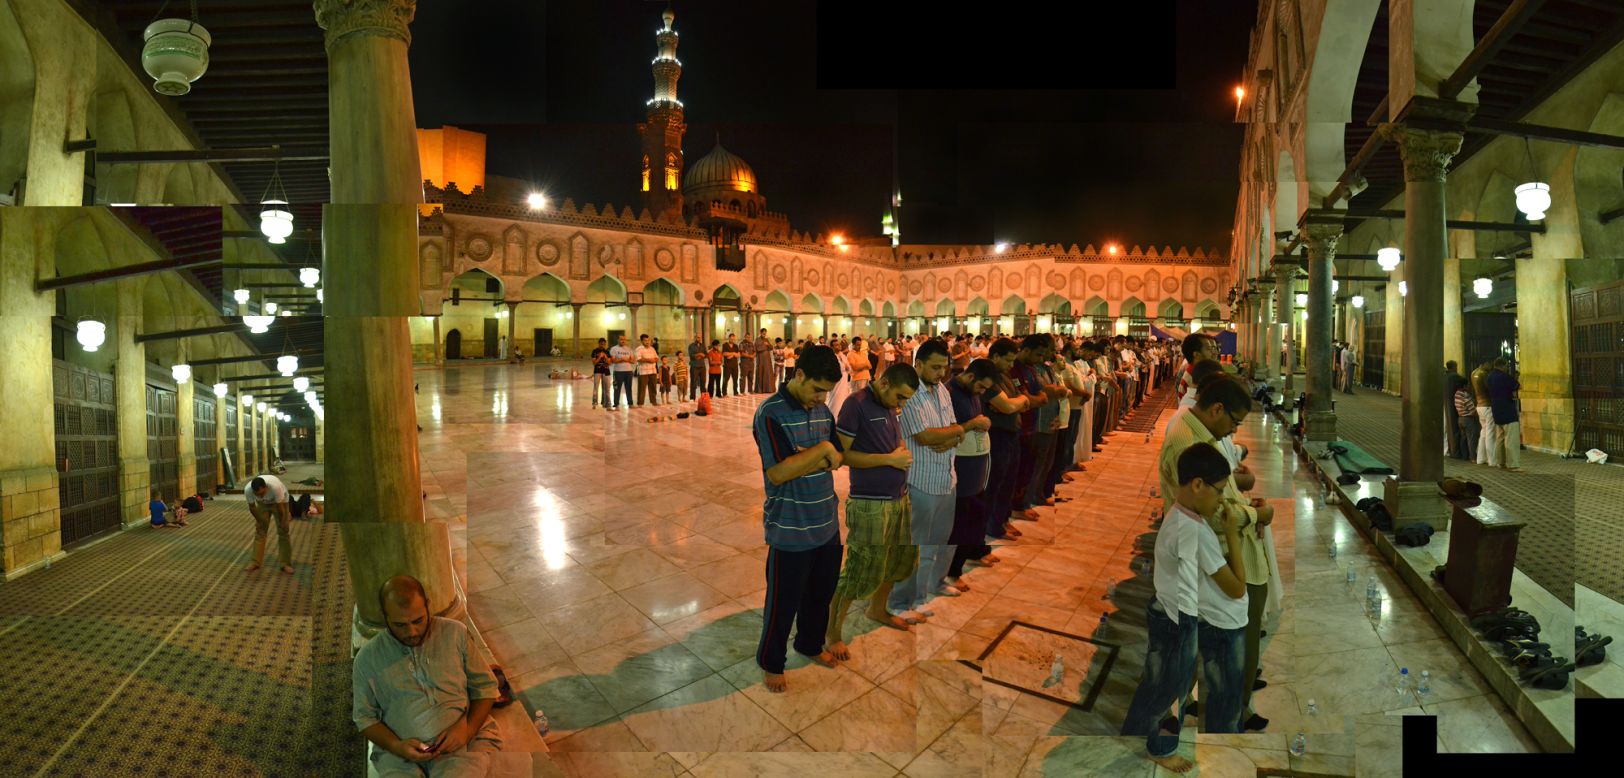 Usually, says Barkatulla, mosques represent a respite. During the holy month of Ramadan, this isn't always possible. <br /><br />"In Ramadan mosques are packed with men and women into the late night," he says. <br /> <br />